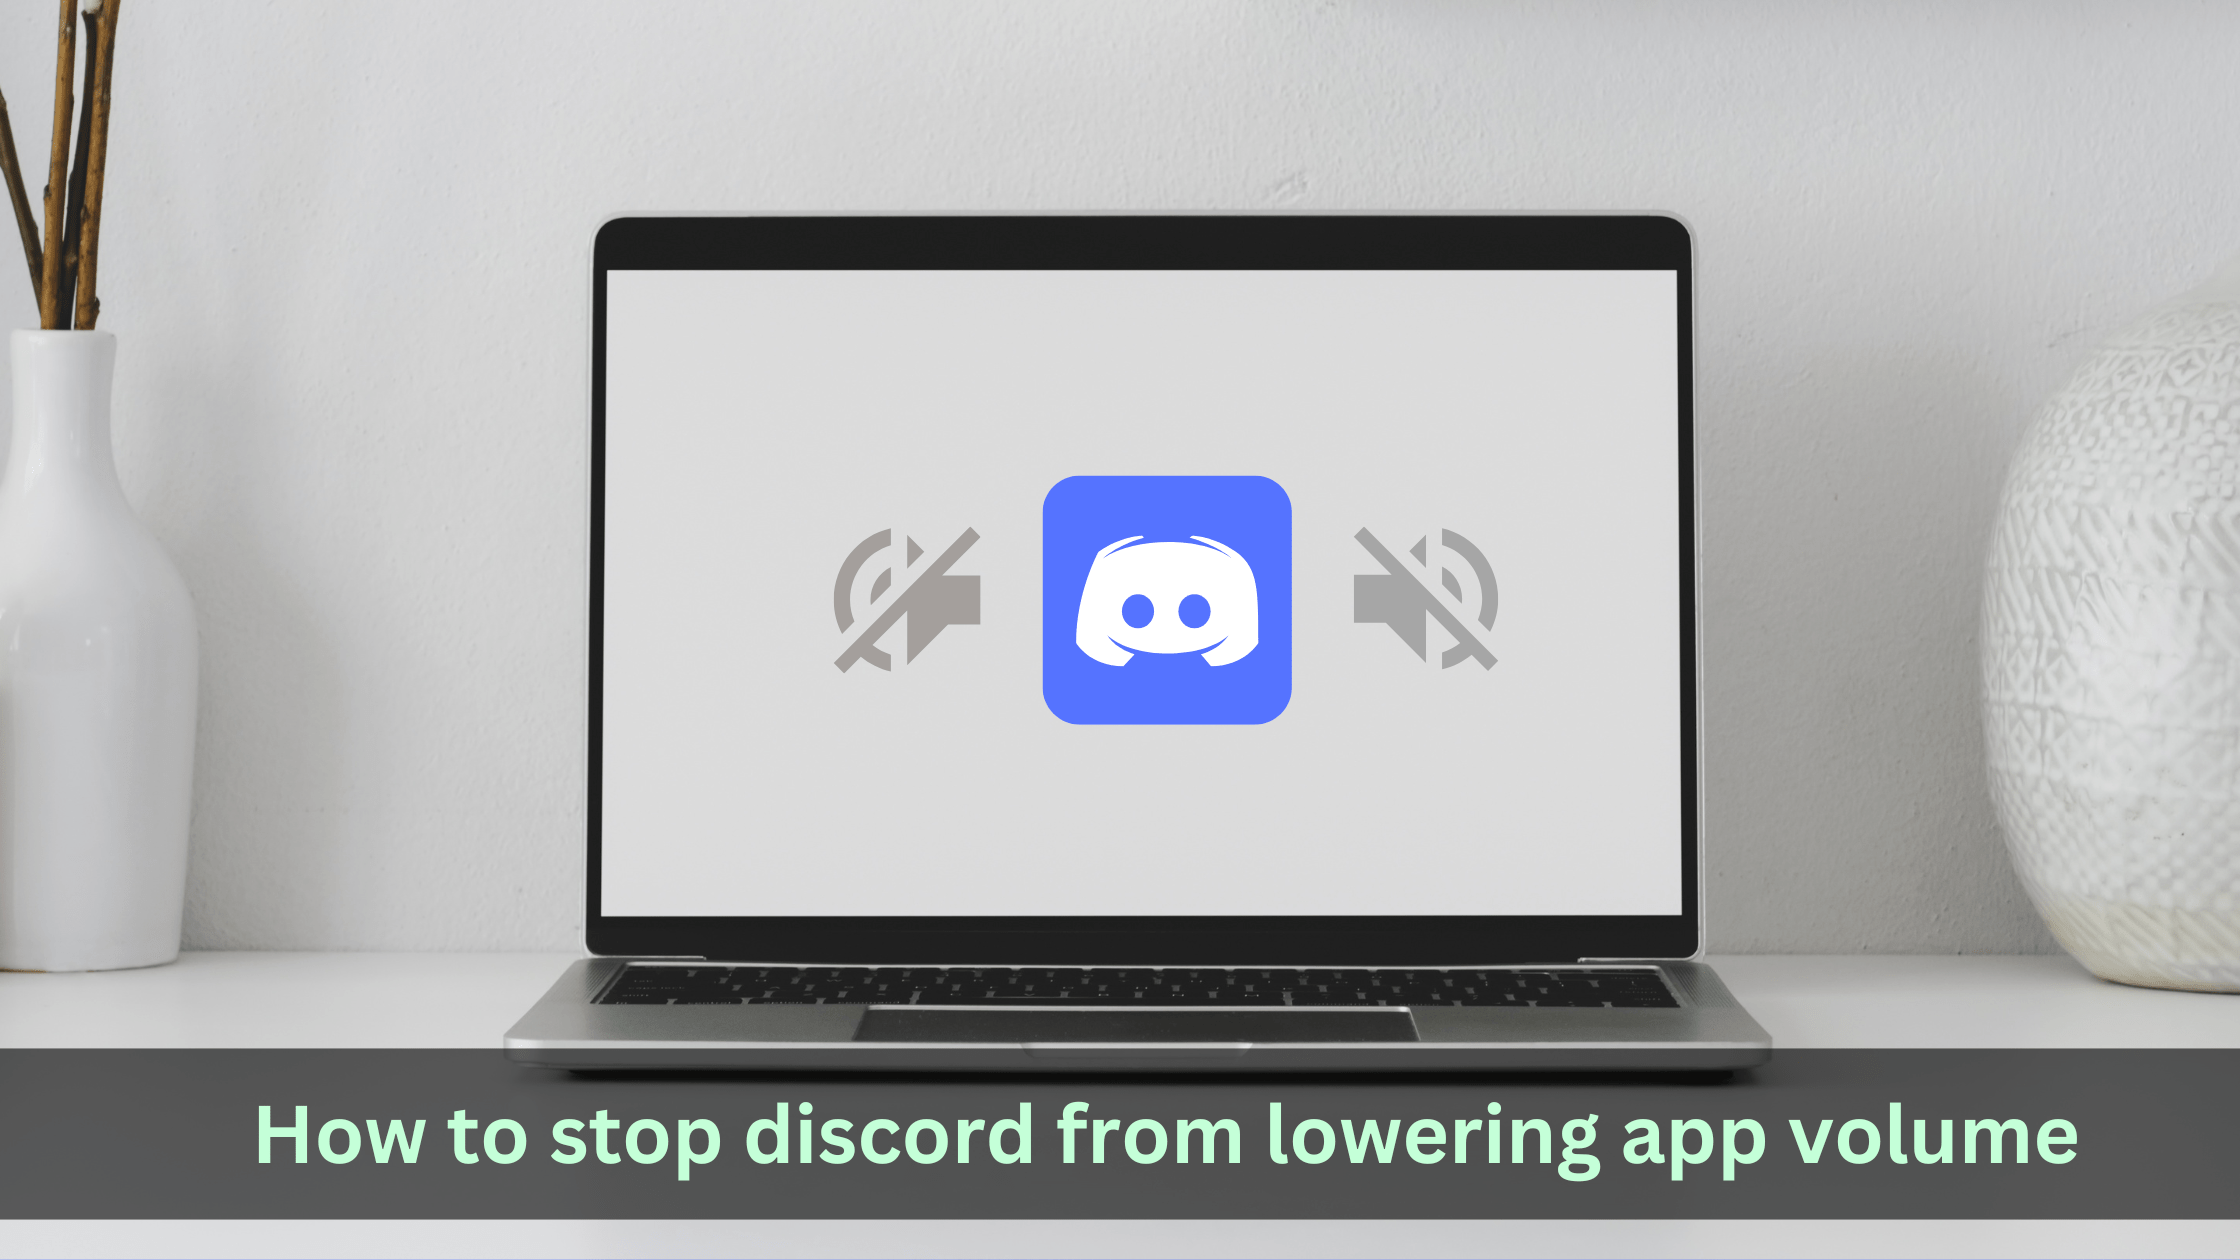 How to stop discord from lowering app volume